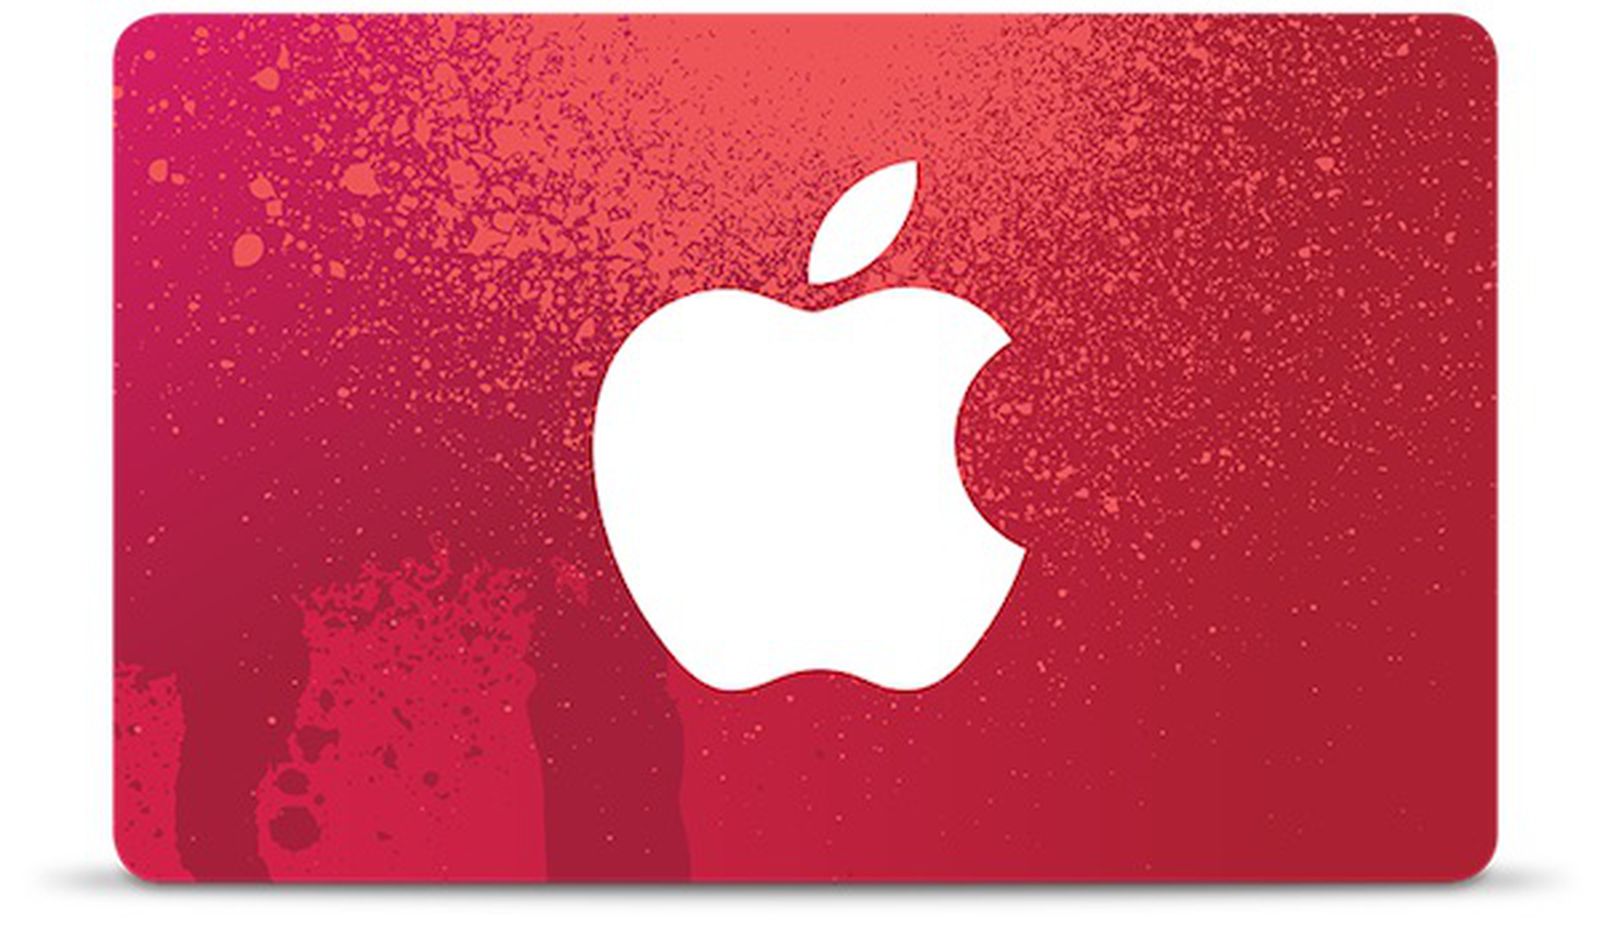 ITUNES Dripping Paint 2014 Gift Card $0 - Collectable Only Red - V3 